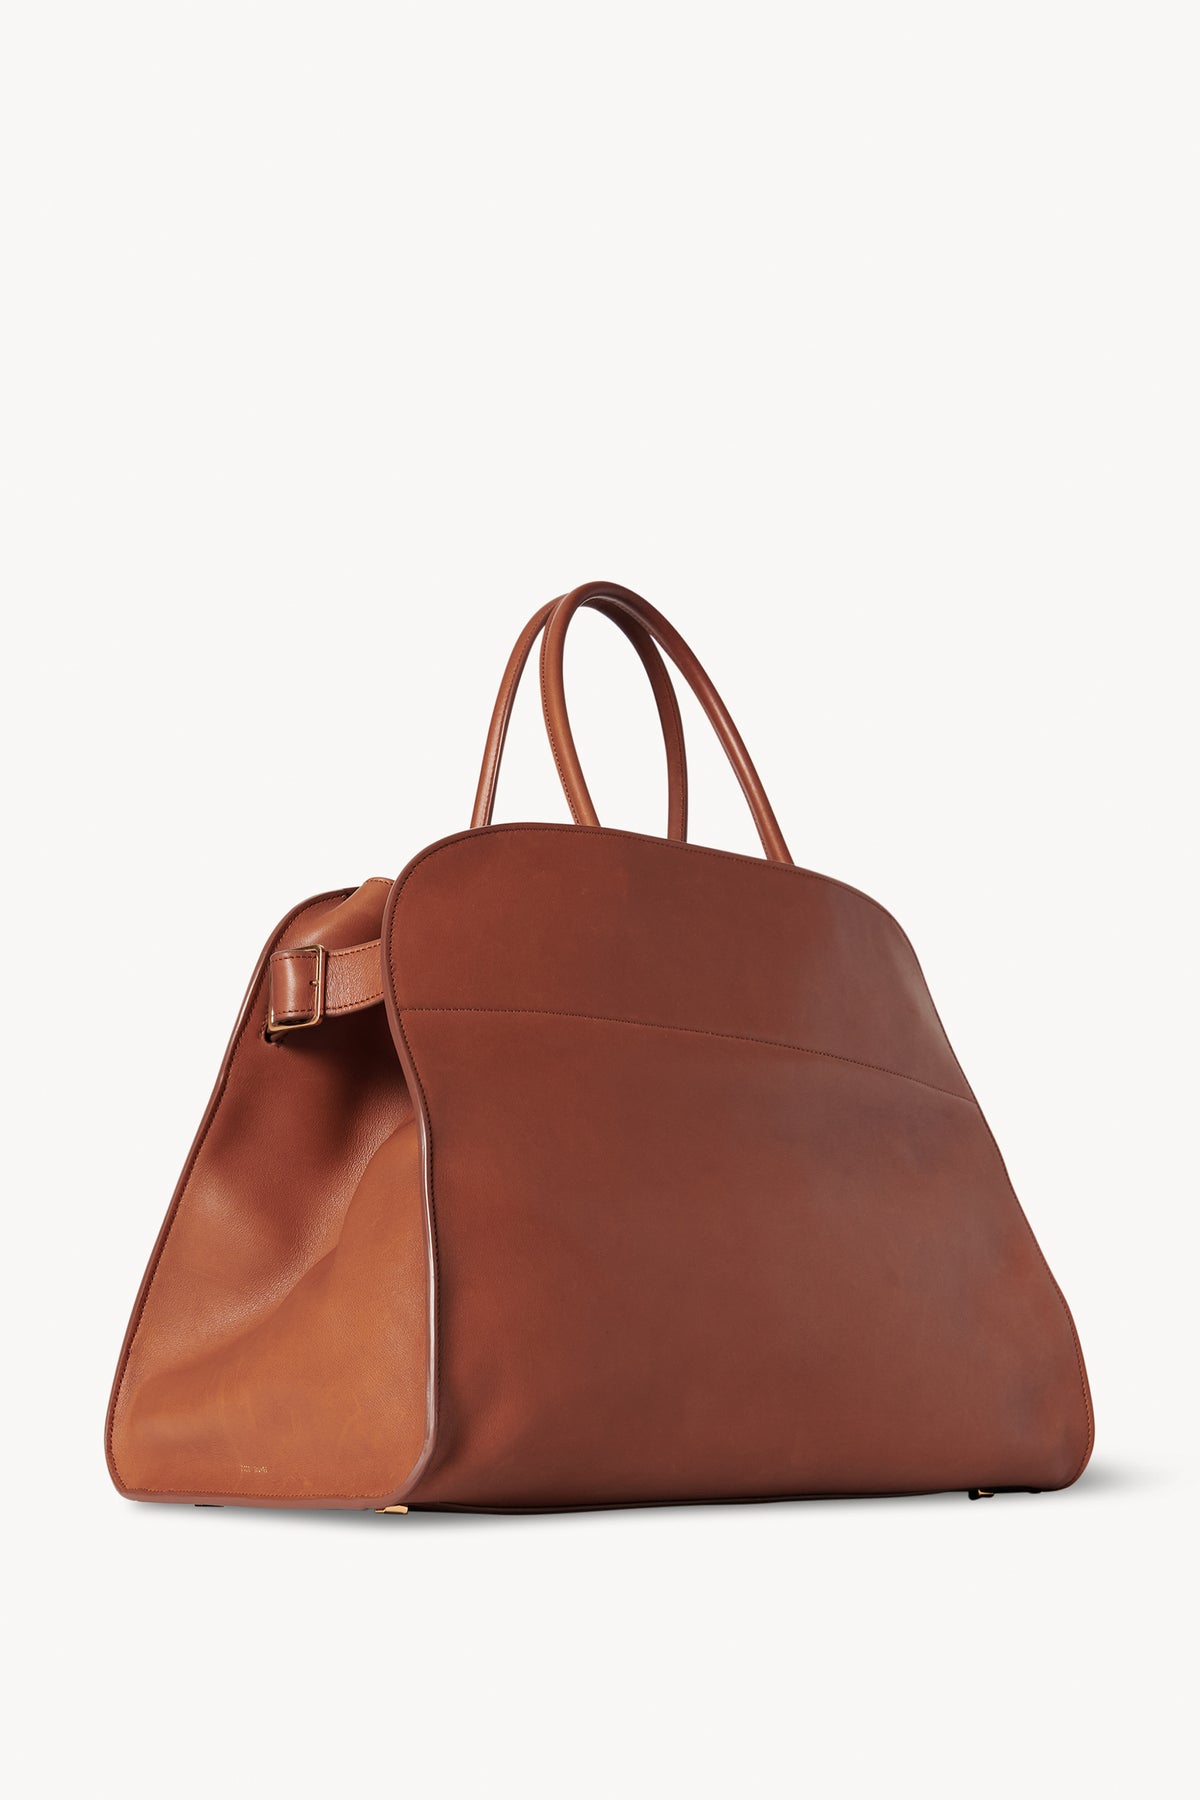 The Row's Margaux Bag Is the Only Item on My Wishlist